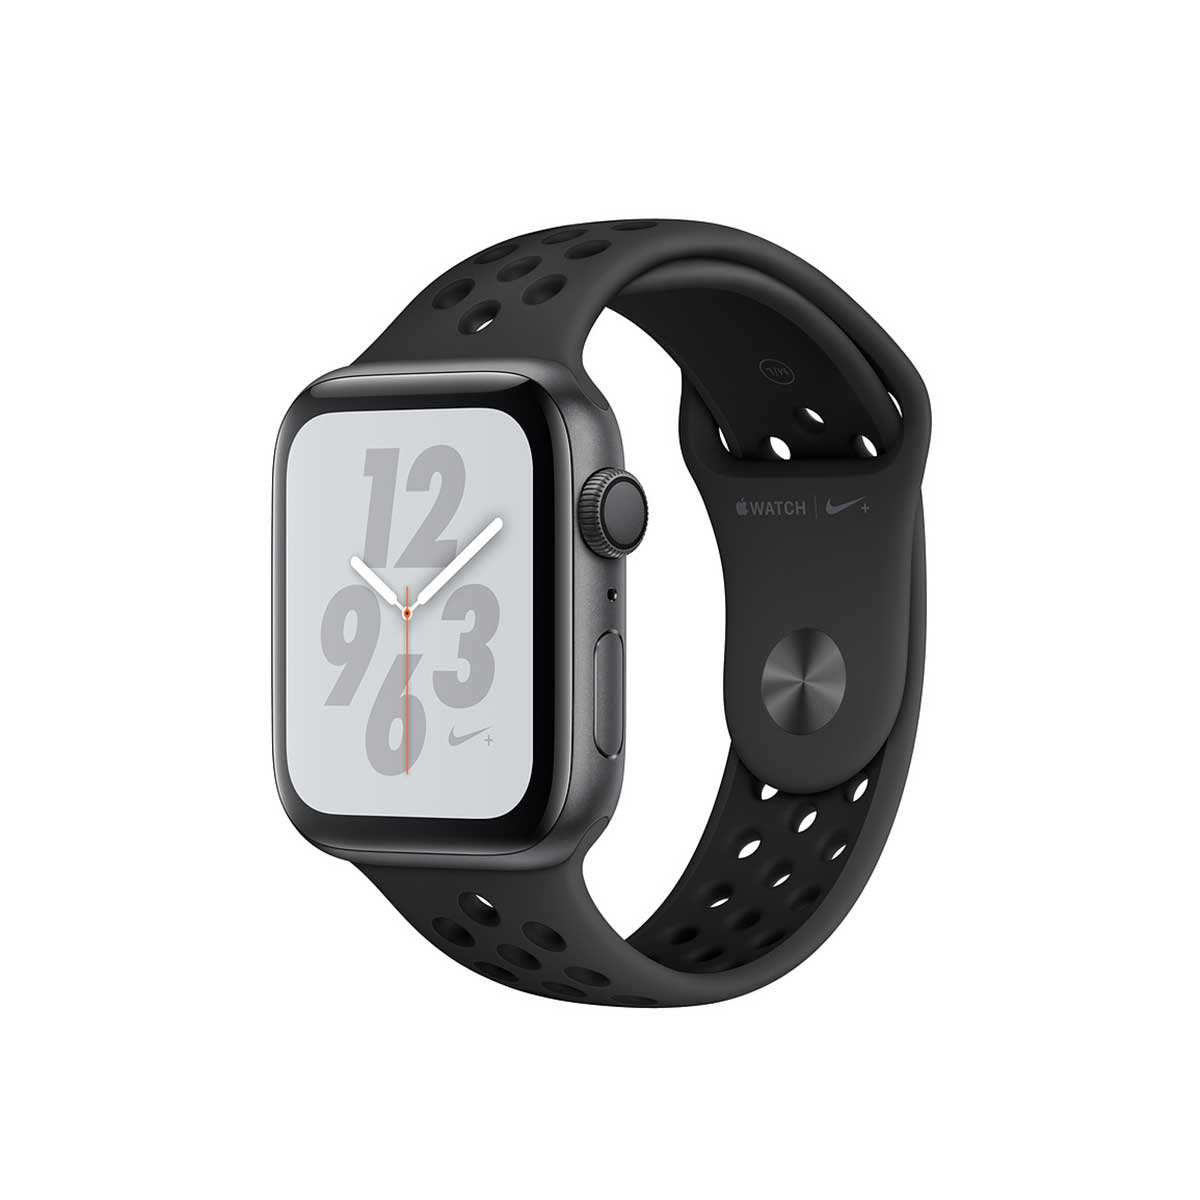 Apple Watch Nike+ Series 4 GPS, 44mm Space Gray Aluminum Case with Anthracite/Black Nike Sport Band